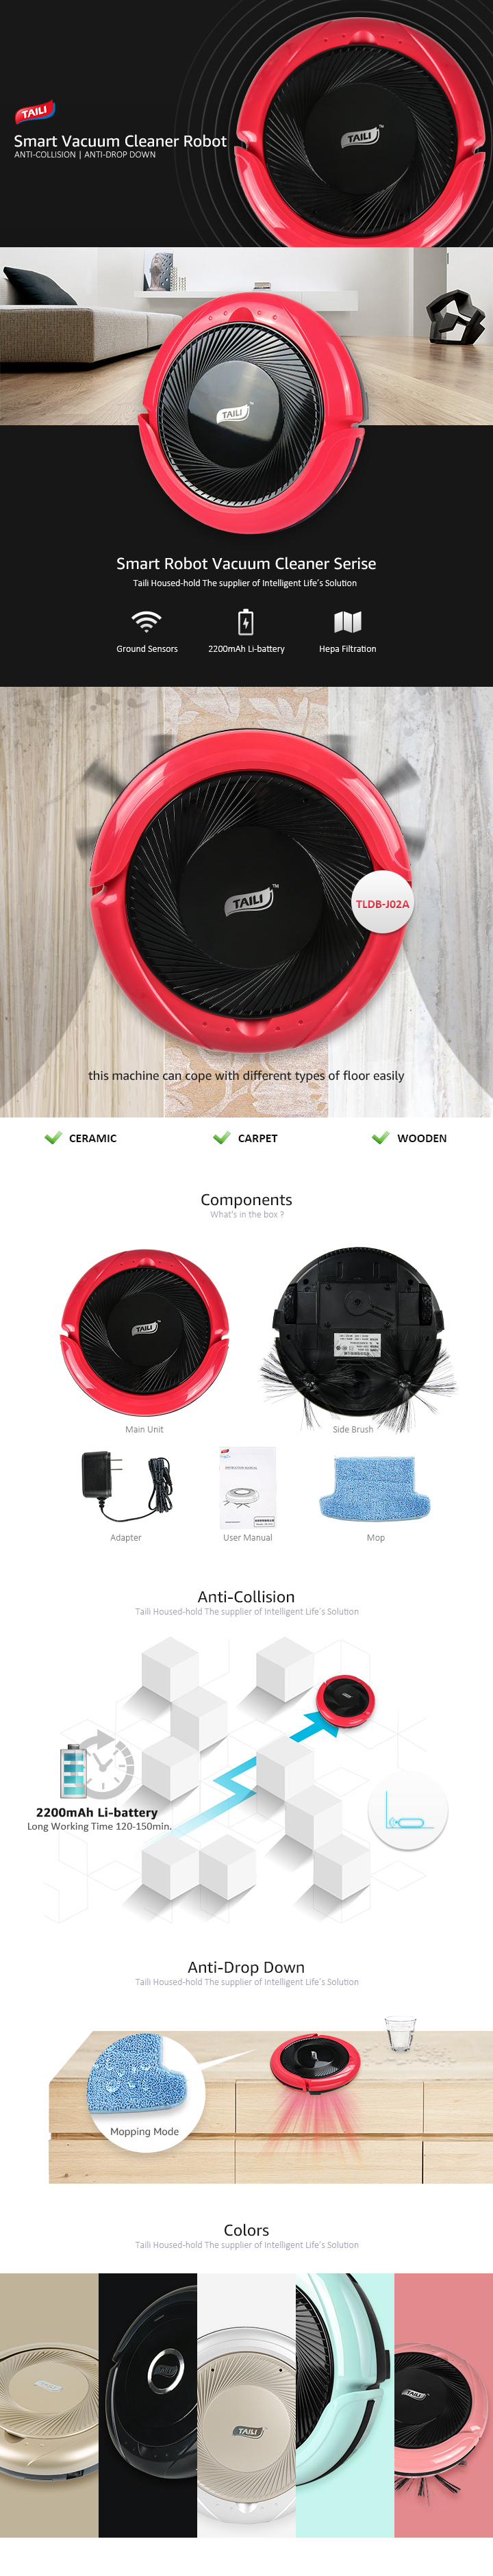 2018 Most Popular Intelligent Cheap and Good Robot Vacuum Cleaner